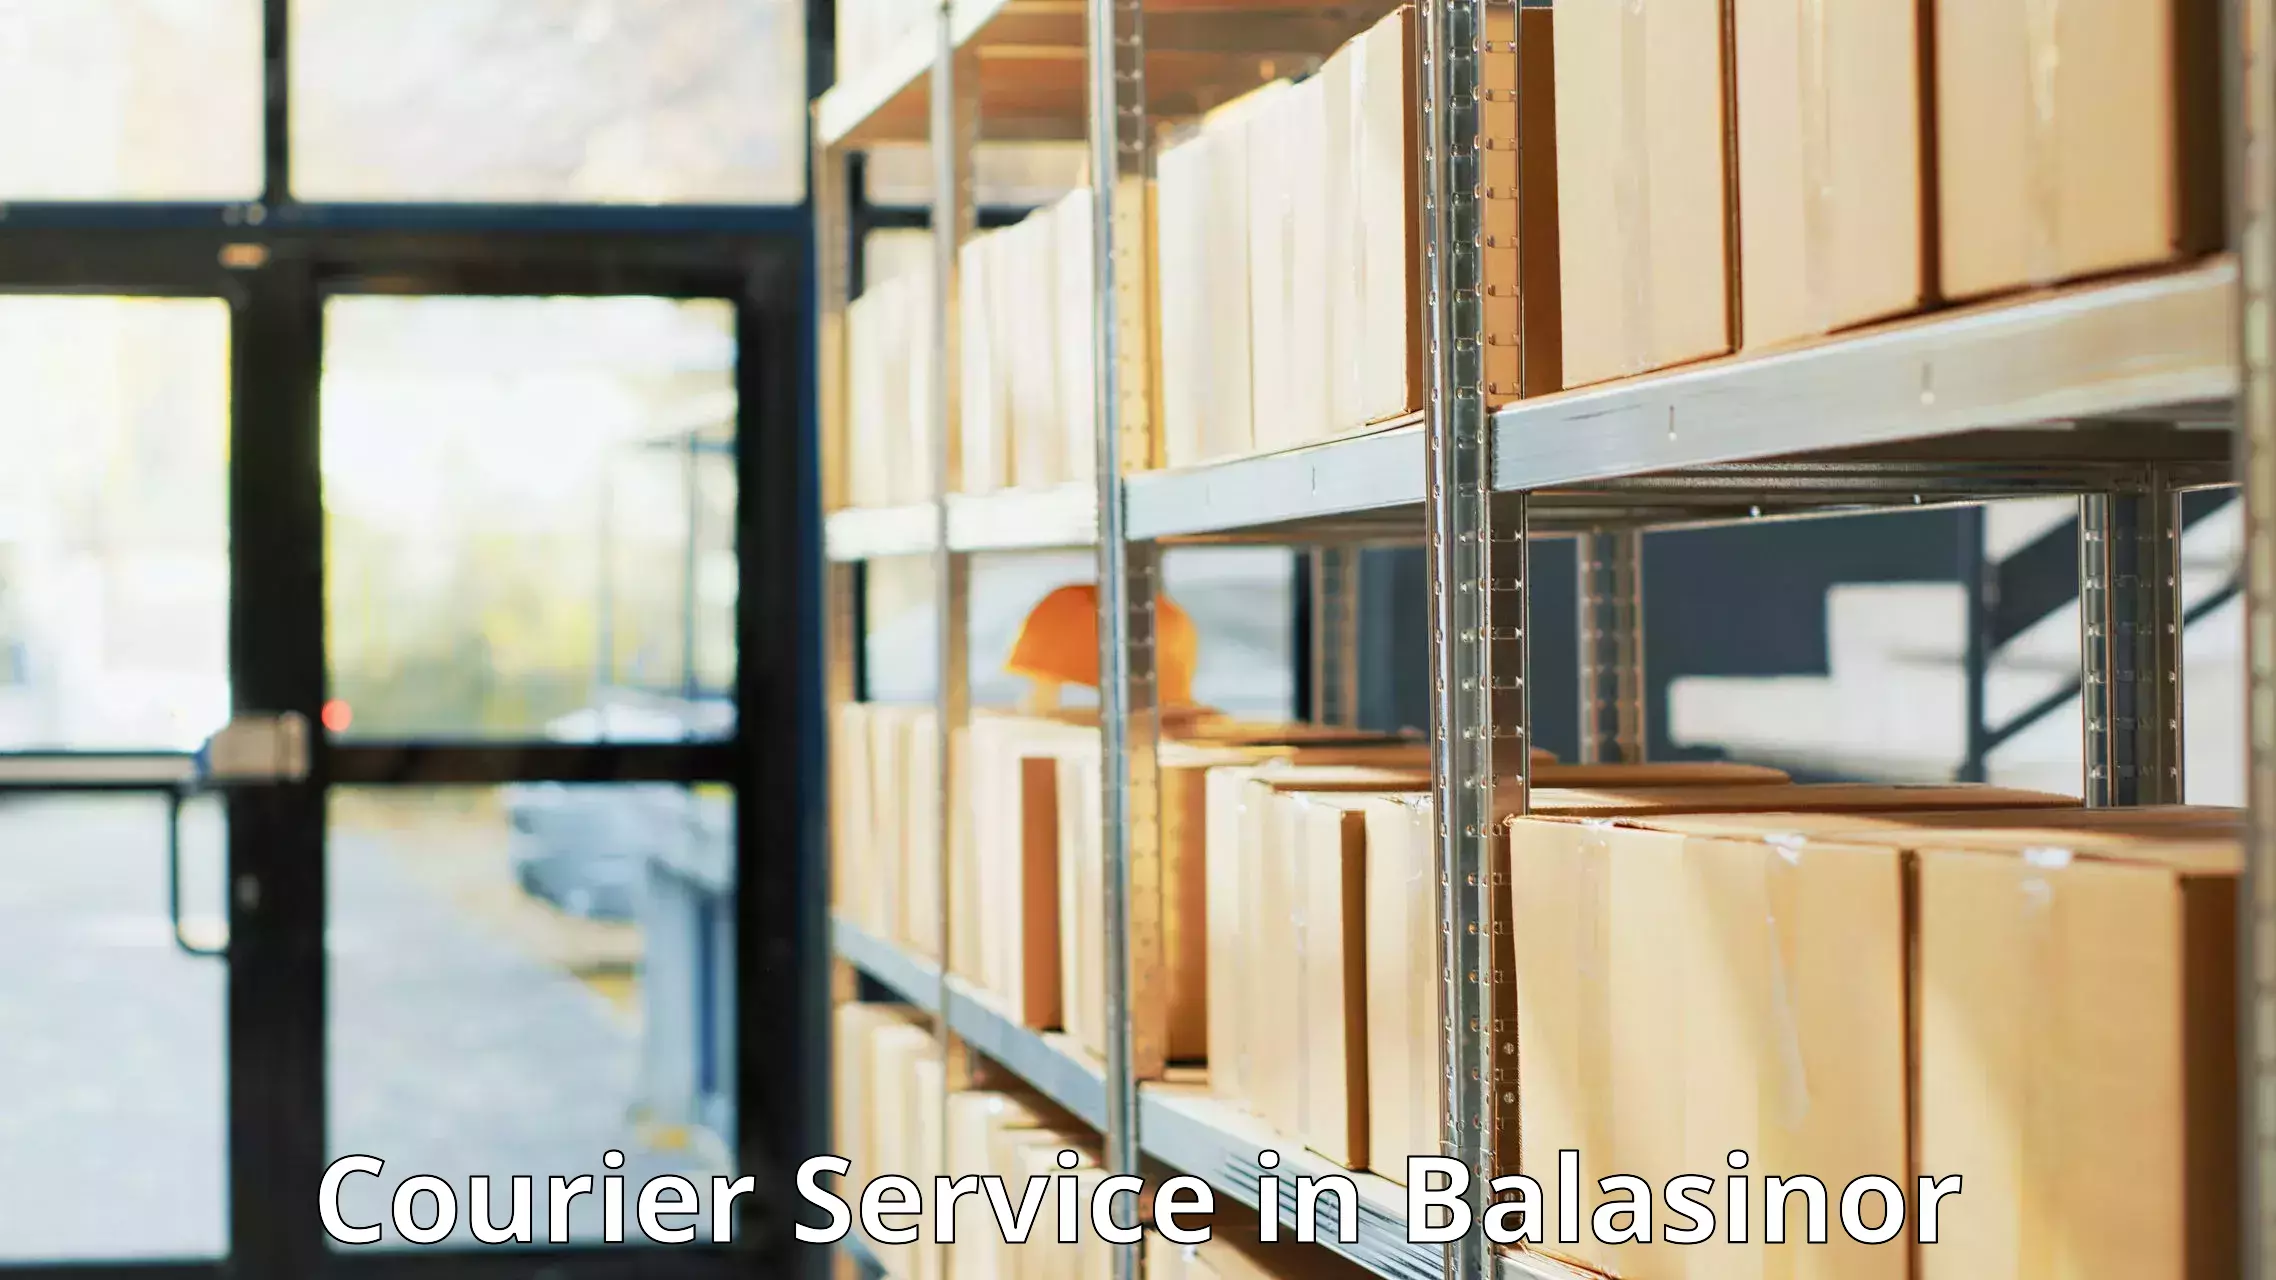 Reliable parcel services in Balasinor